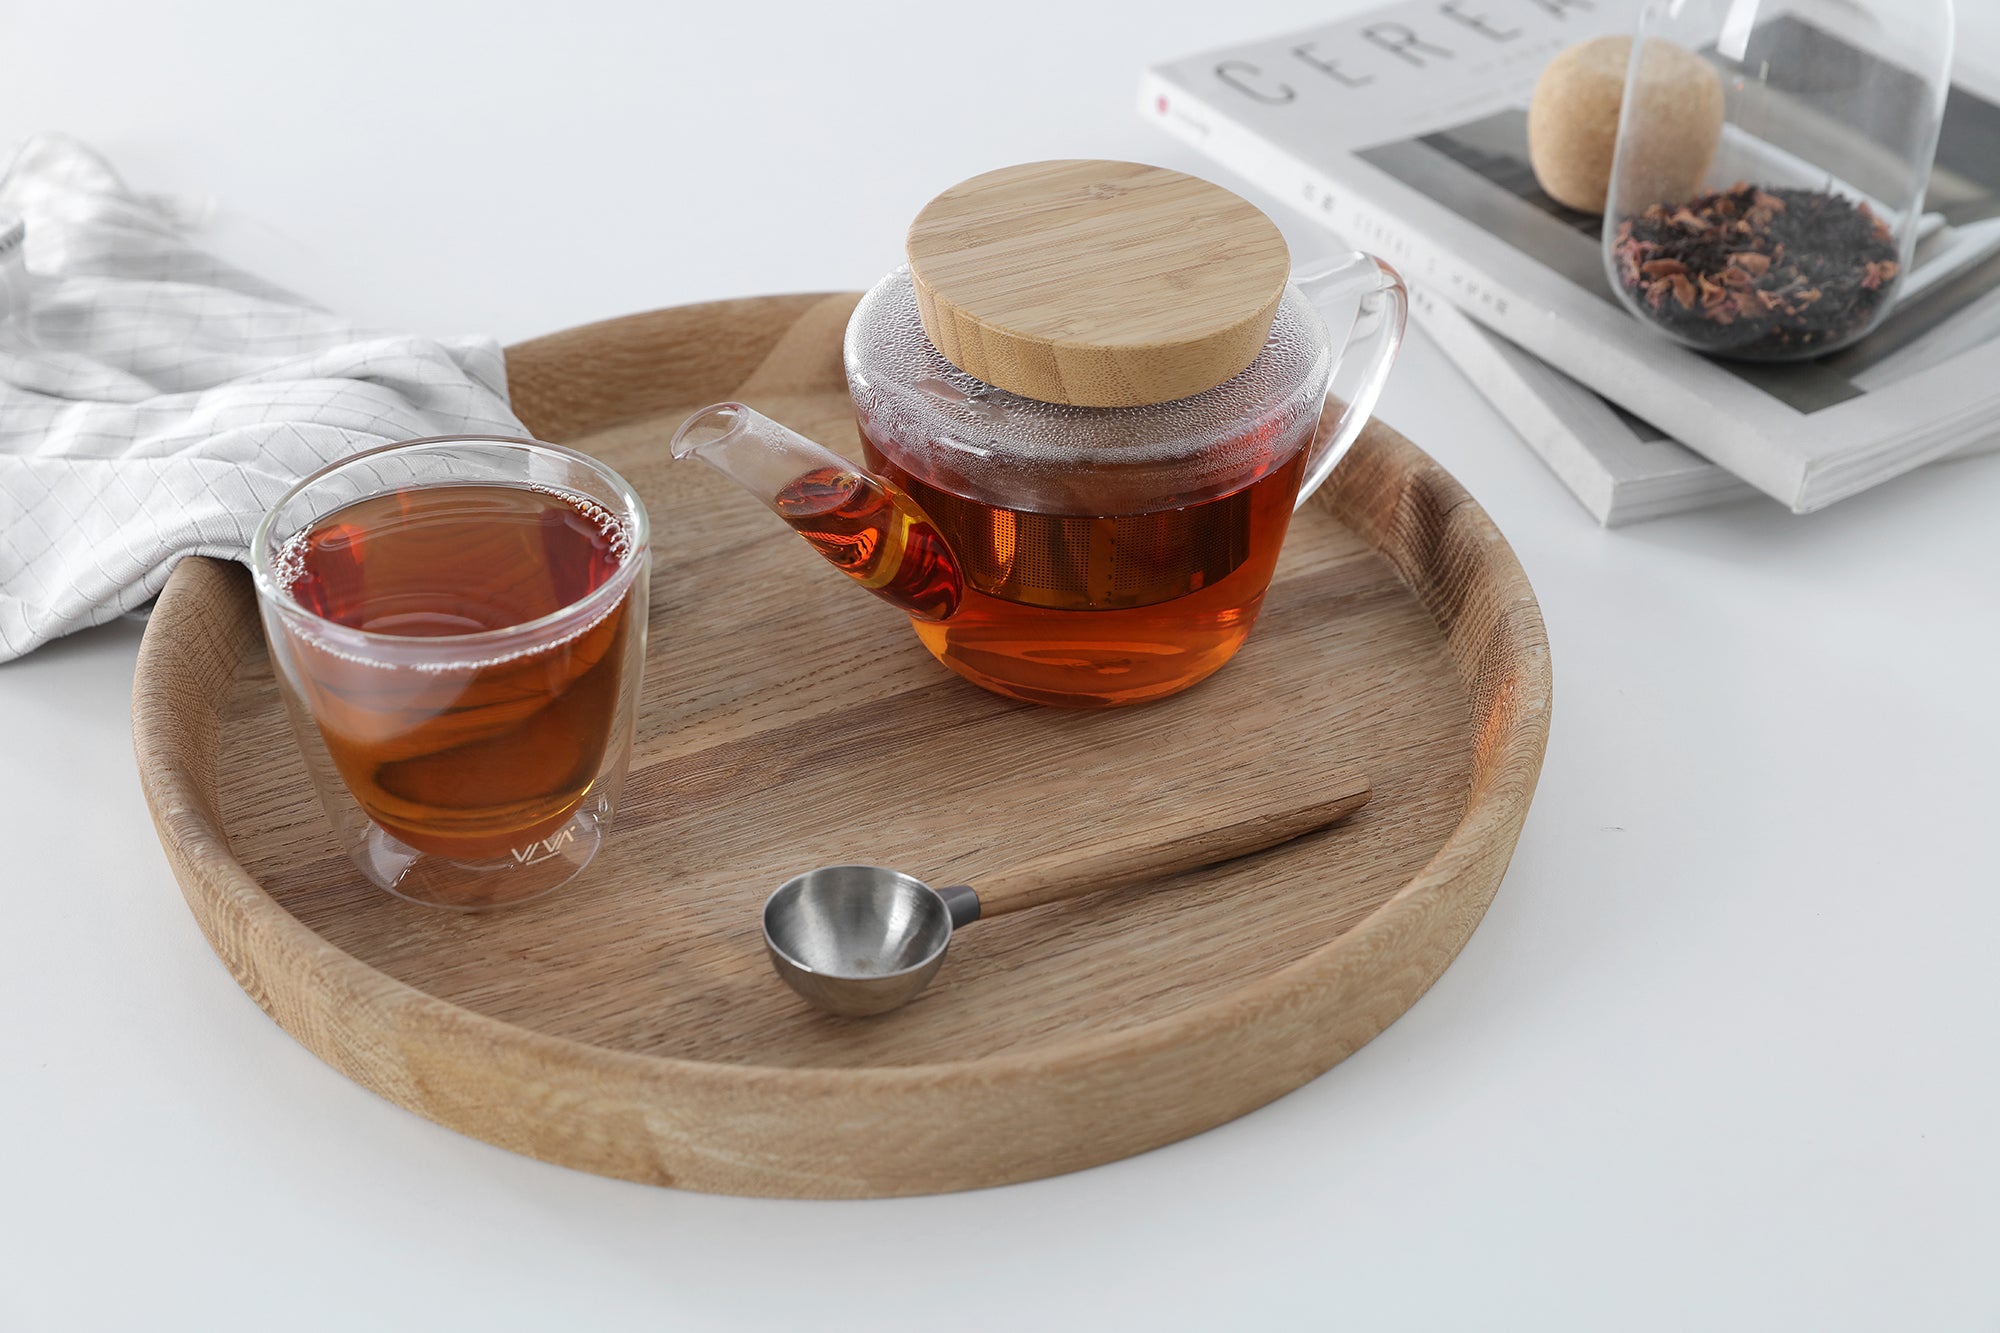 Bodum Tea For One Double Wall Infuser